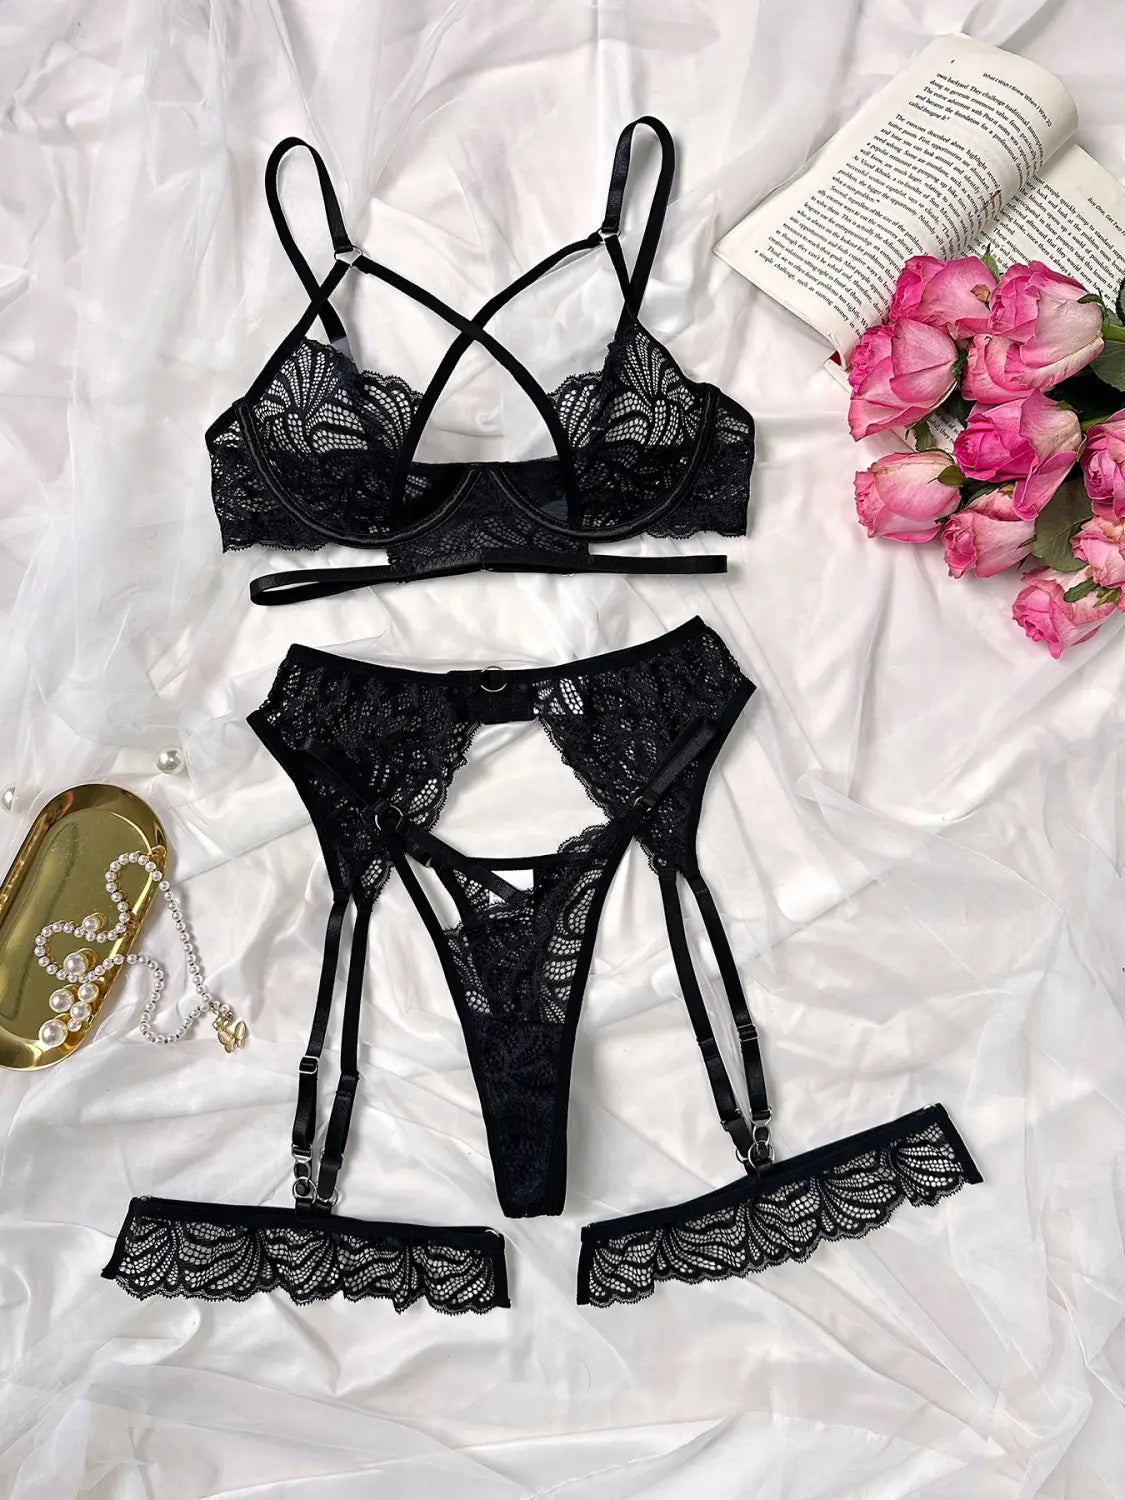 Four Piece Sexy Erotic Lingerie Set With Lace Steel Ring